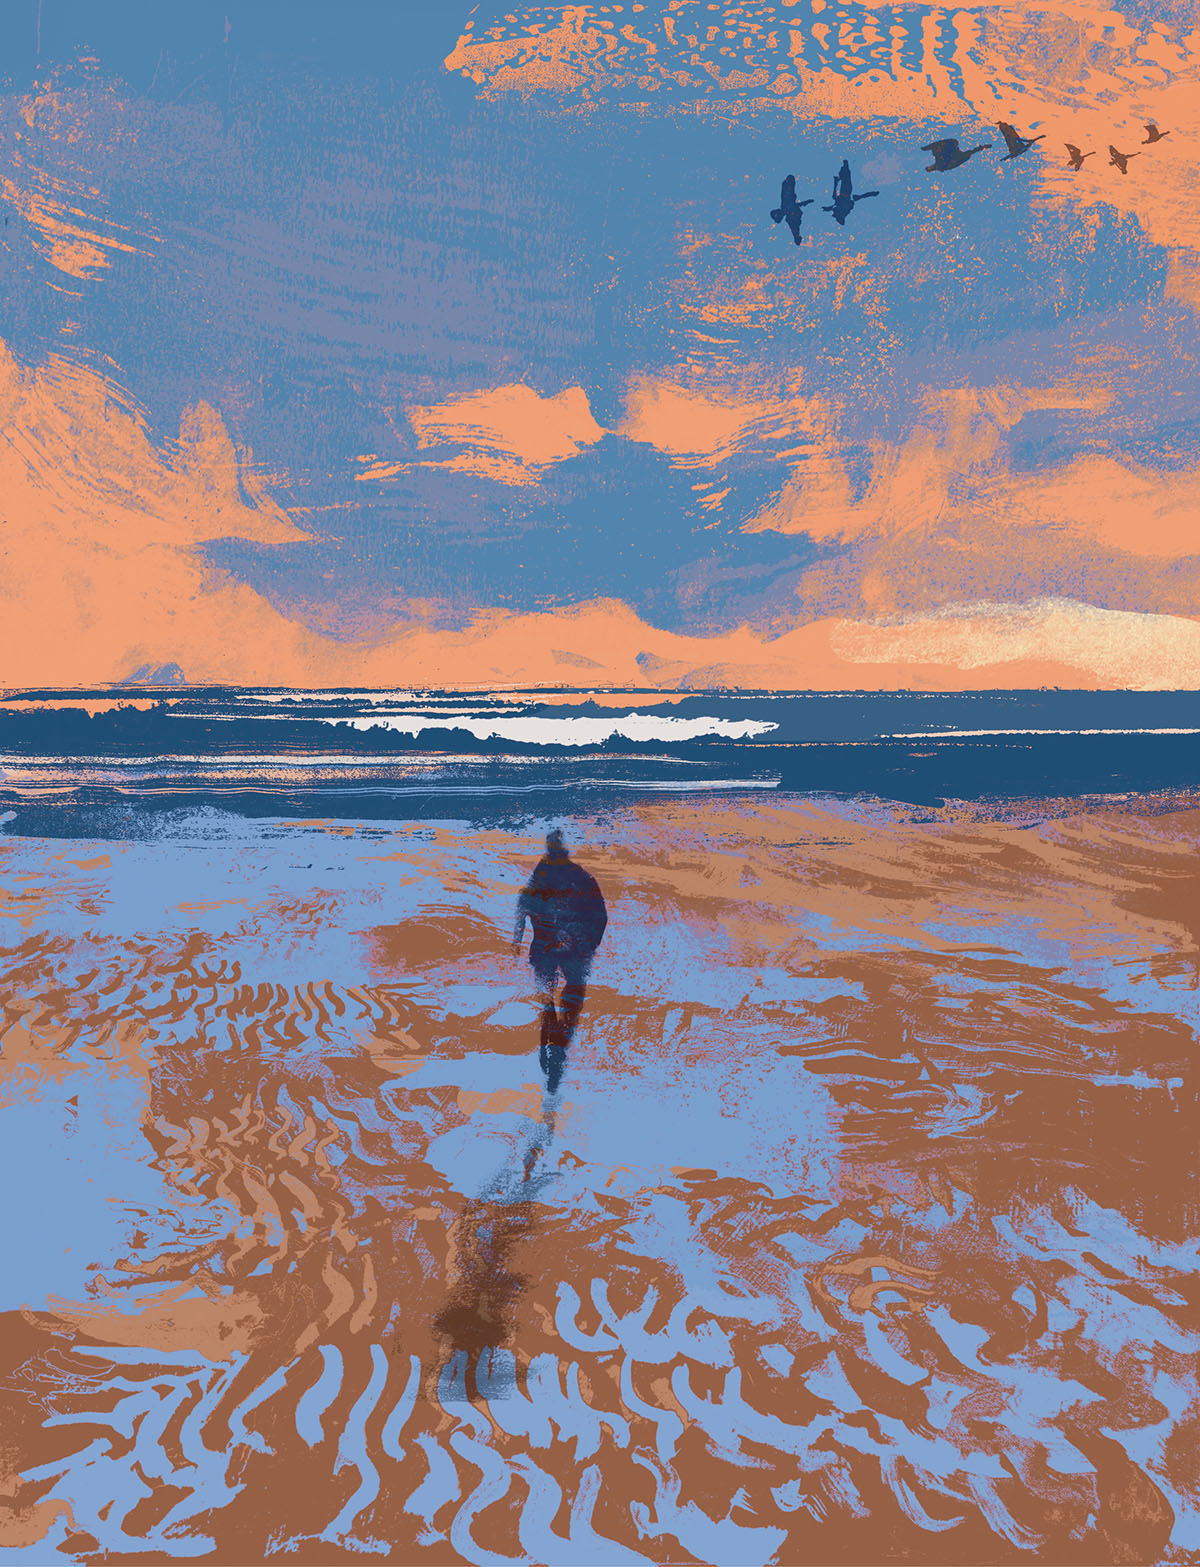 An illustration of a lone figure walking along a rust and blue colored sea shore under matching sky